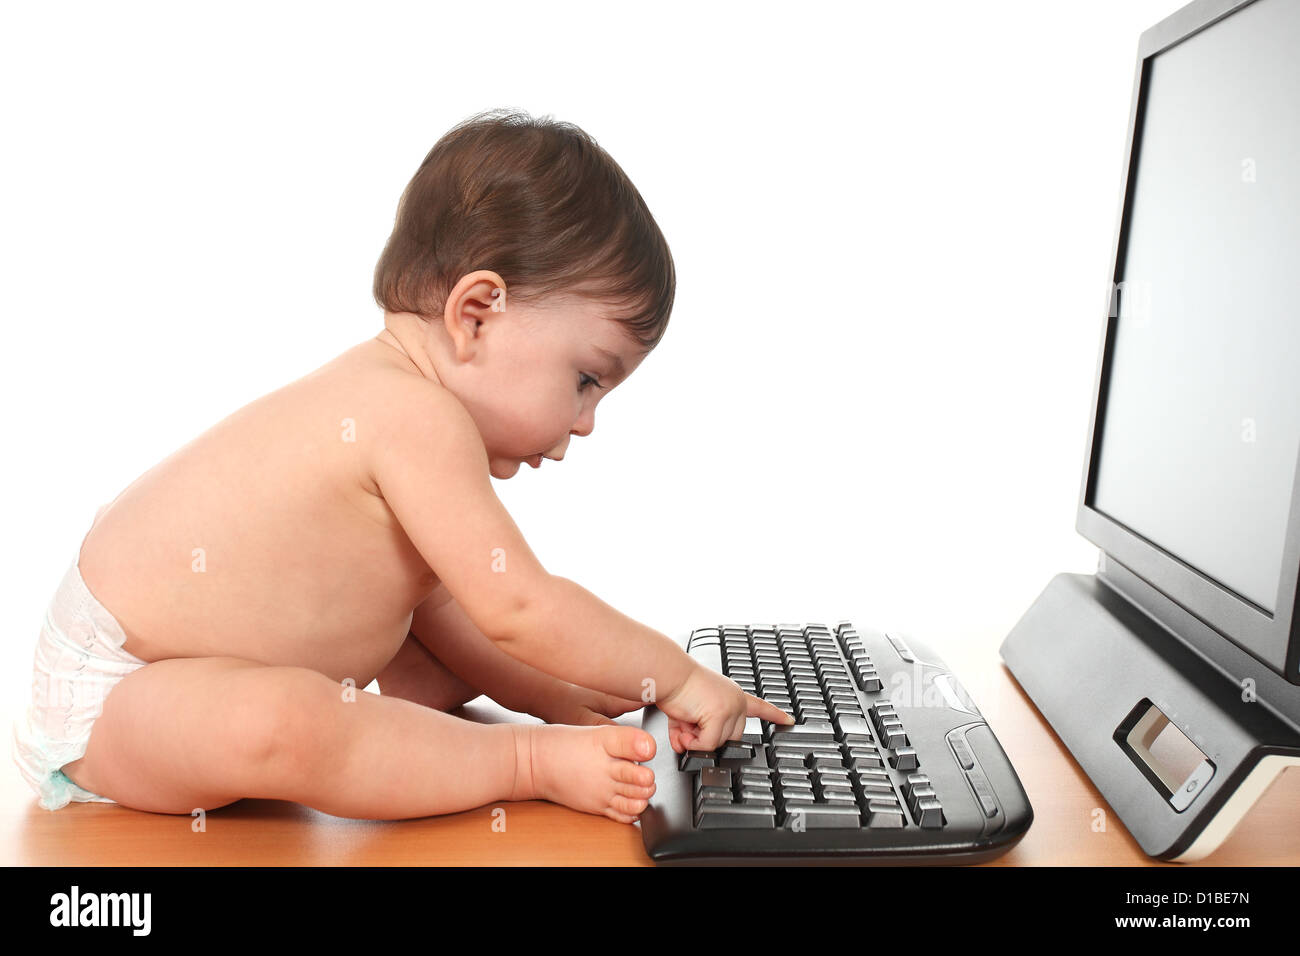 Baby typing enter on a computer keyboard in a white isolated background Stock Photo